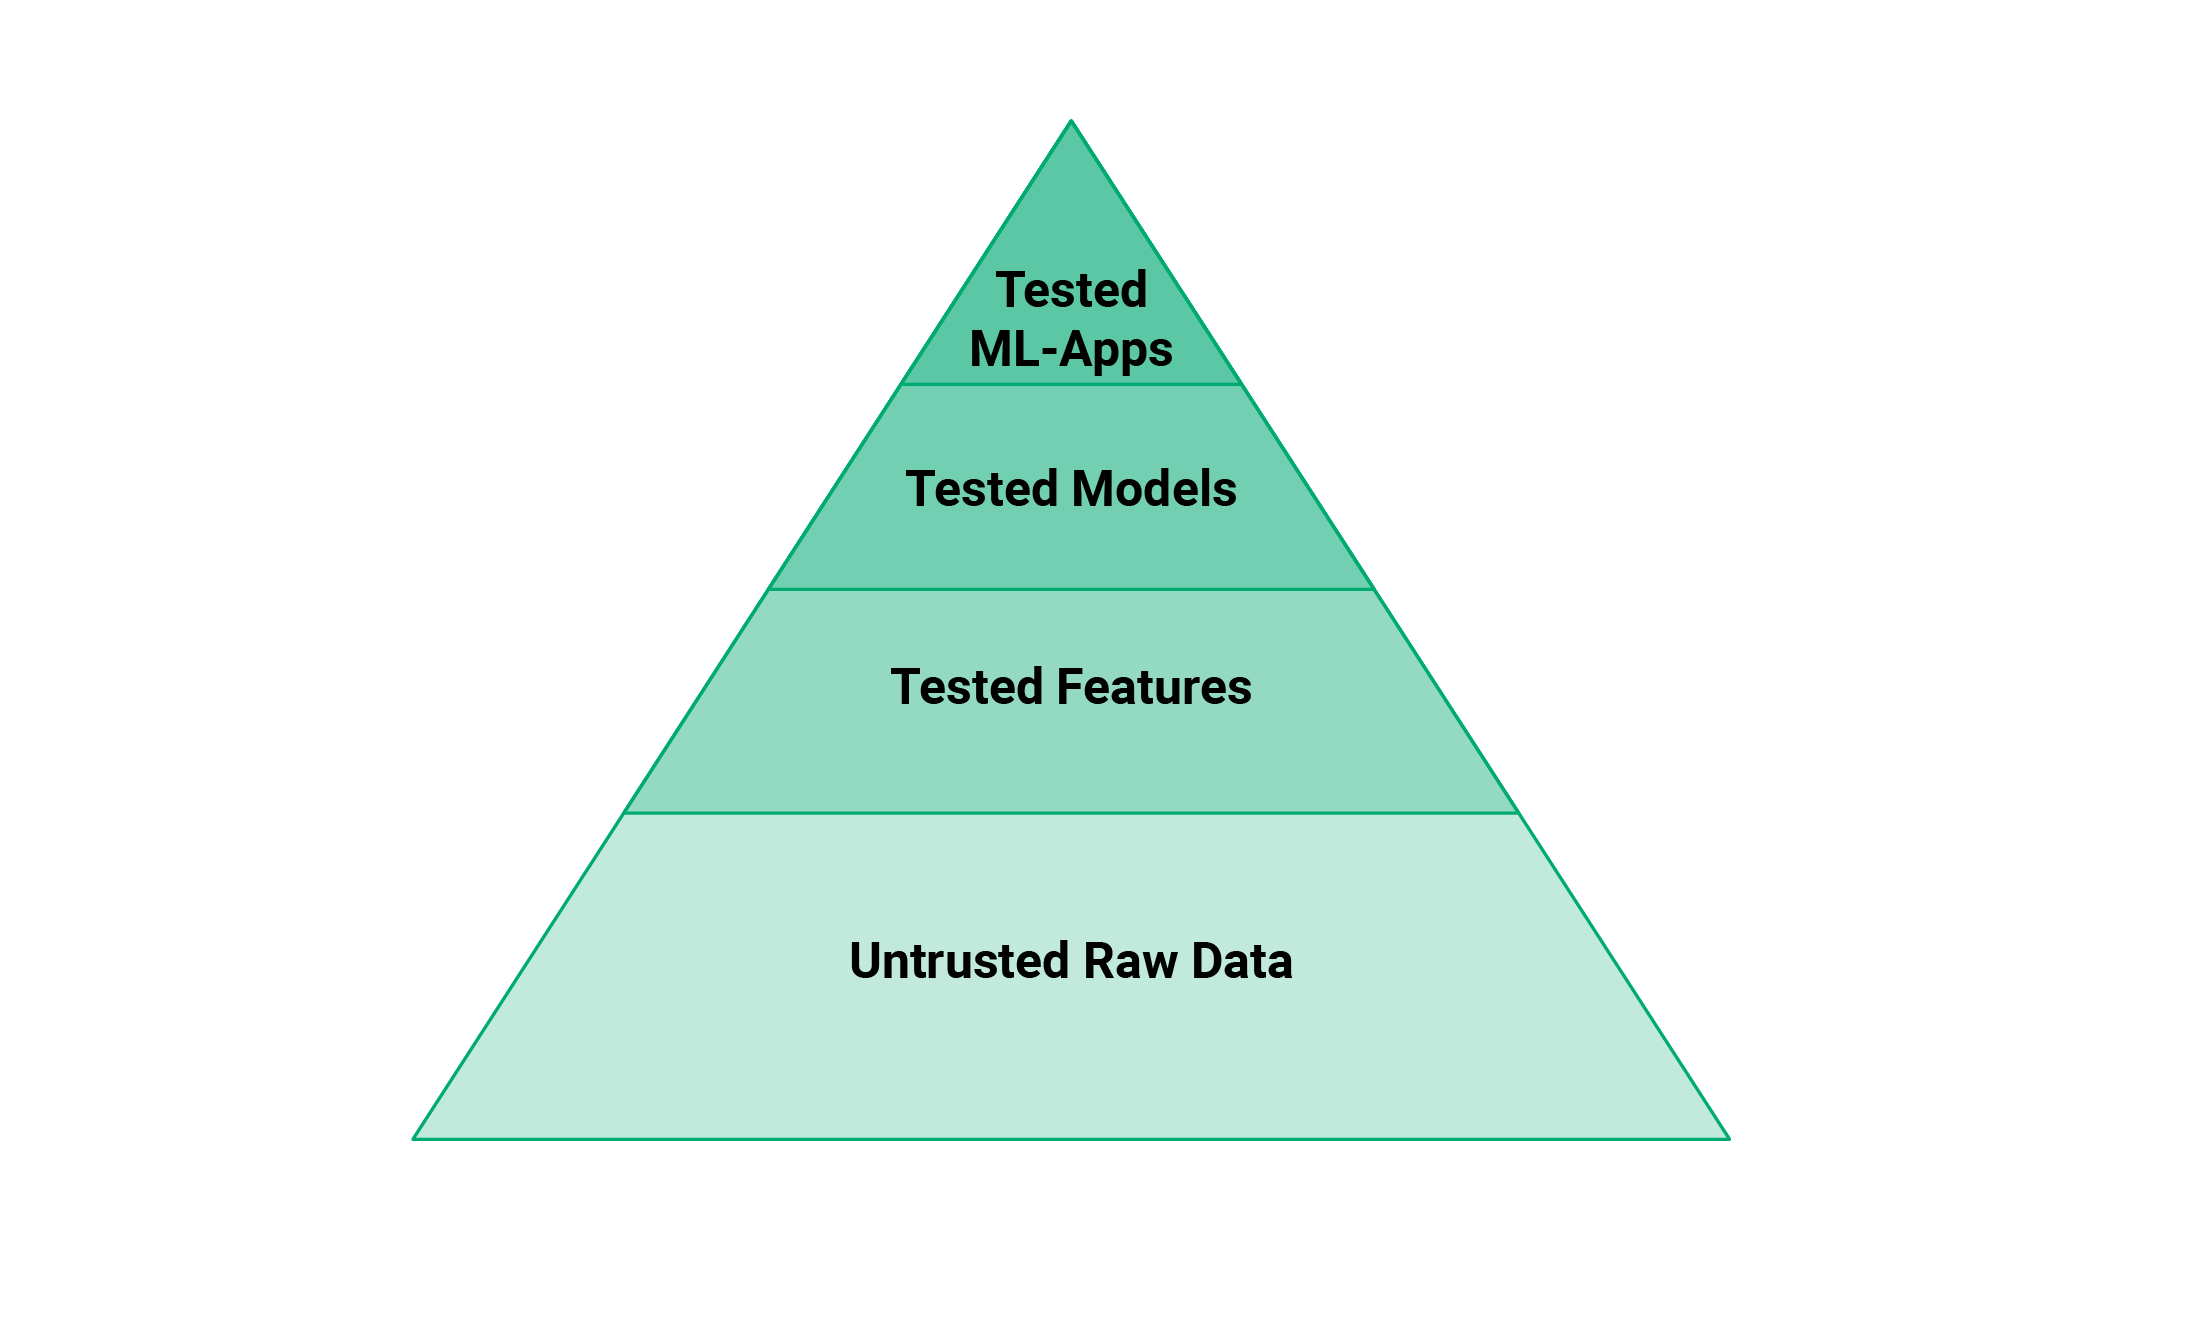 The testing pyramid for ML Artifacts